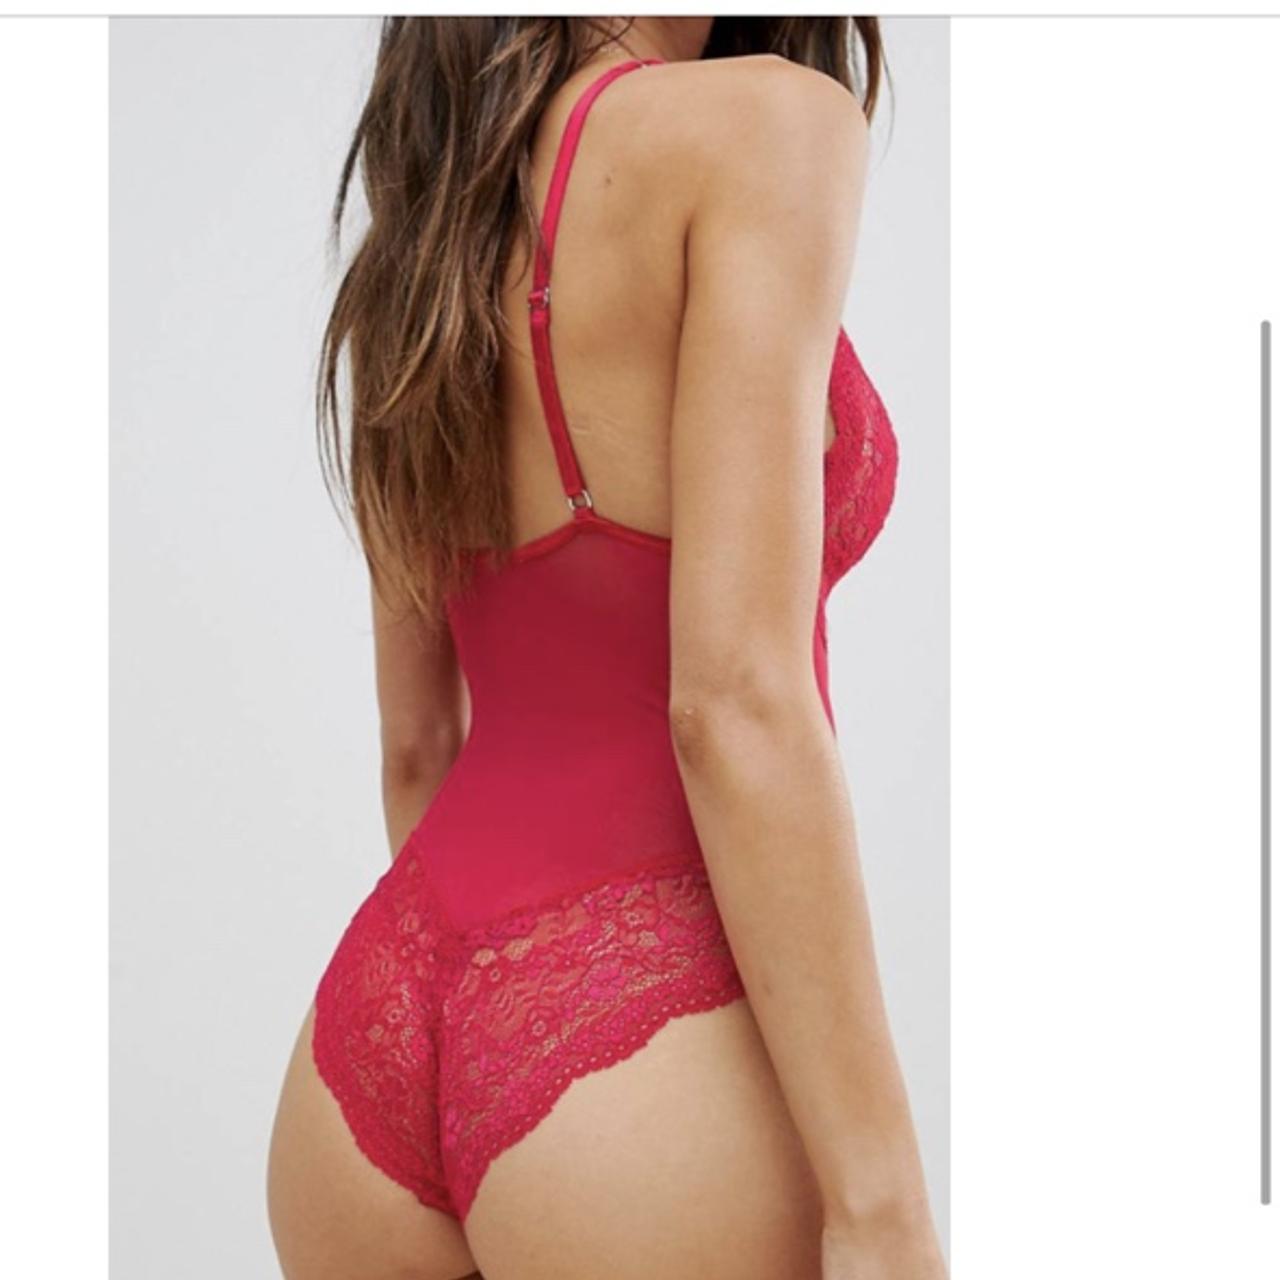 Chloe Strappy Open Back Bodysuit Cherry Red Thong Sexy ShopAA